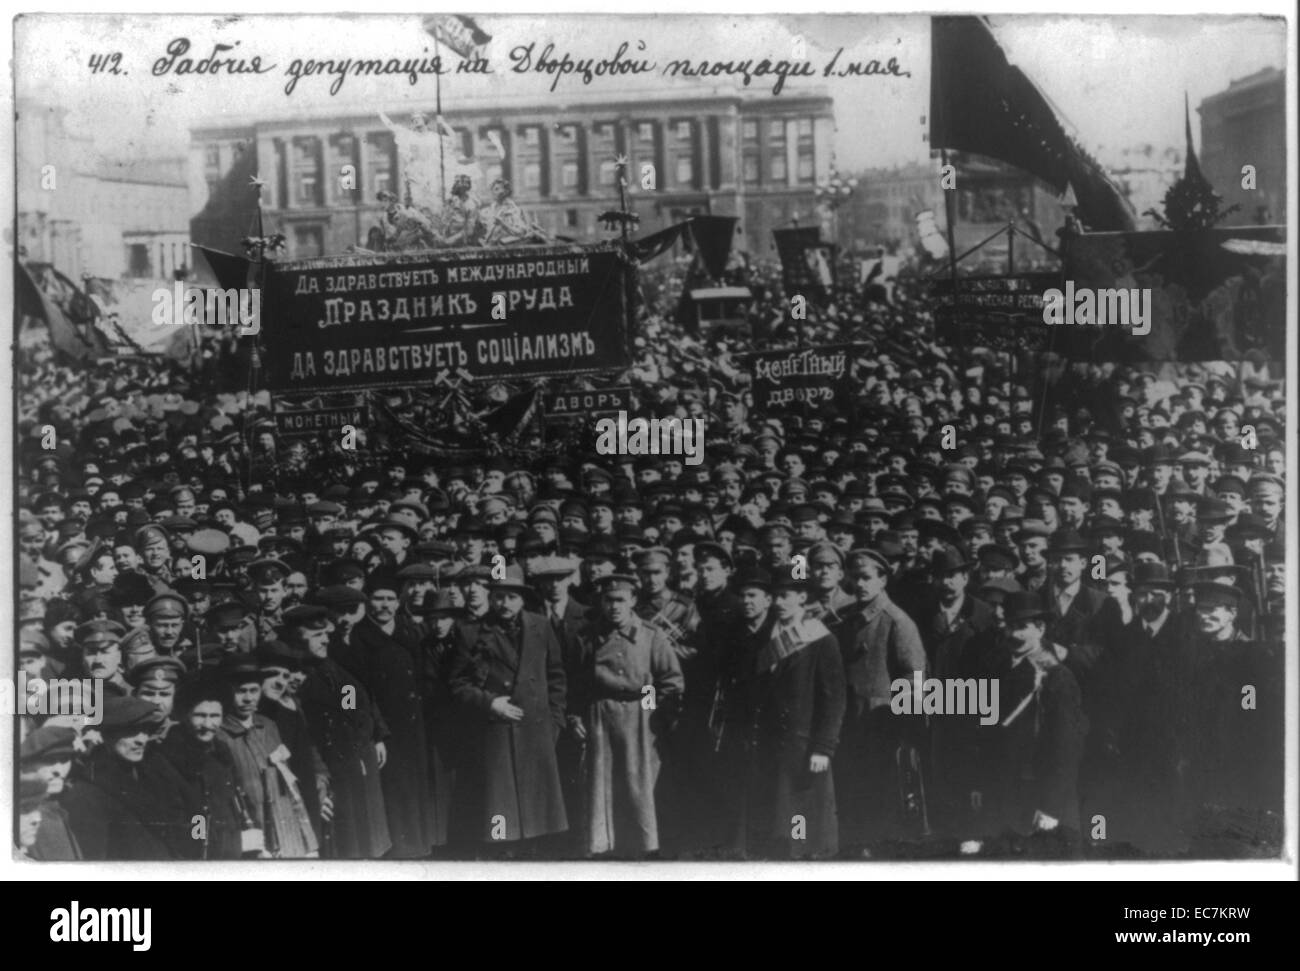 Russian revolution Labourer's deputation on the Dvortsovyi Square, Petrograd. The Russian Revolution is the collective term for a series of revolutions in Russia in 1917, which dismantled the Tsarist autocracy and led to the creation of the Russian SFSR. Stock Photo